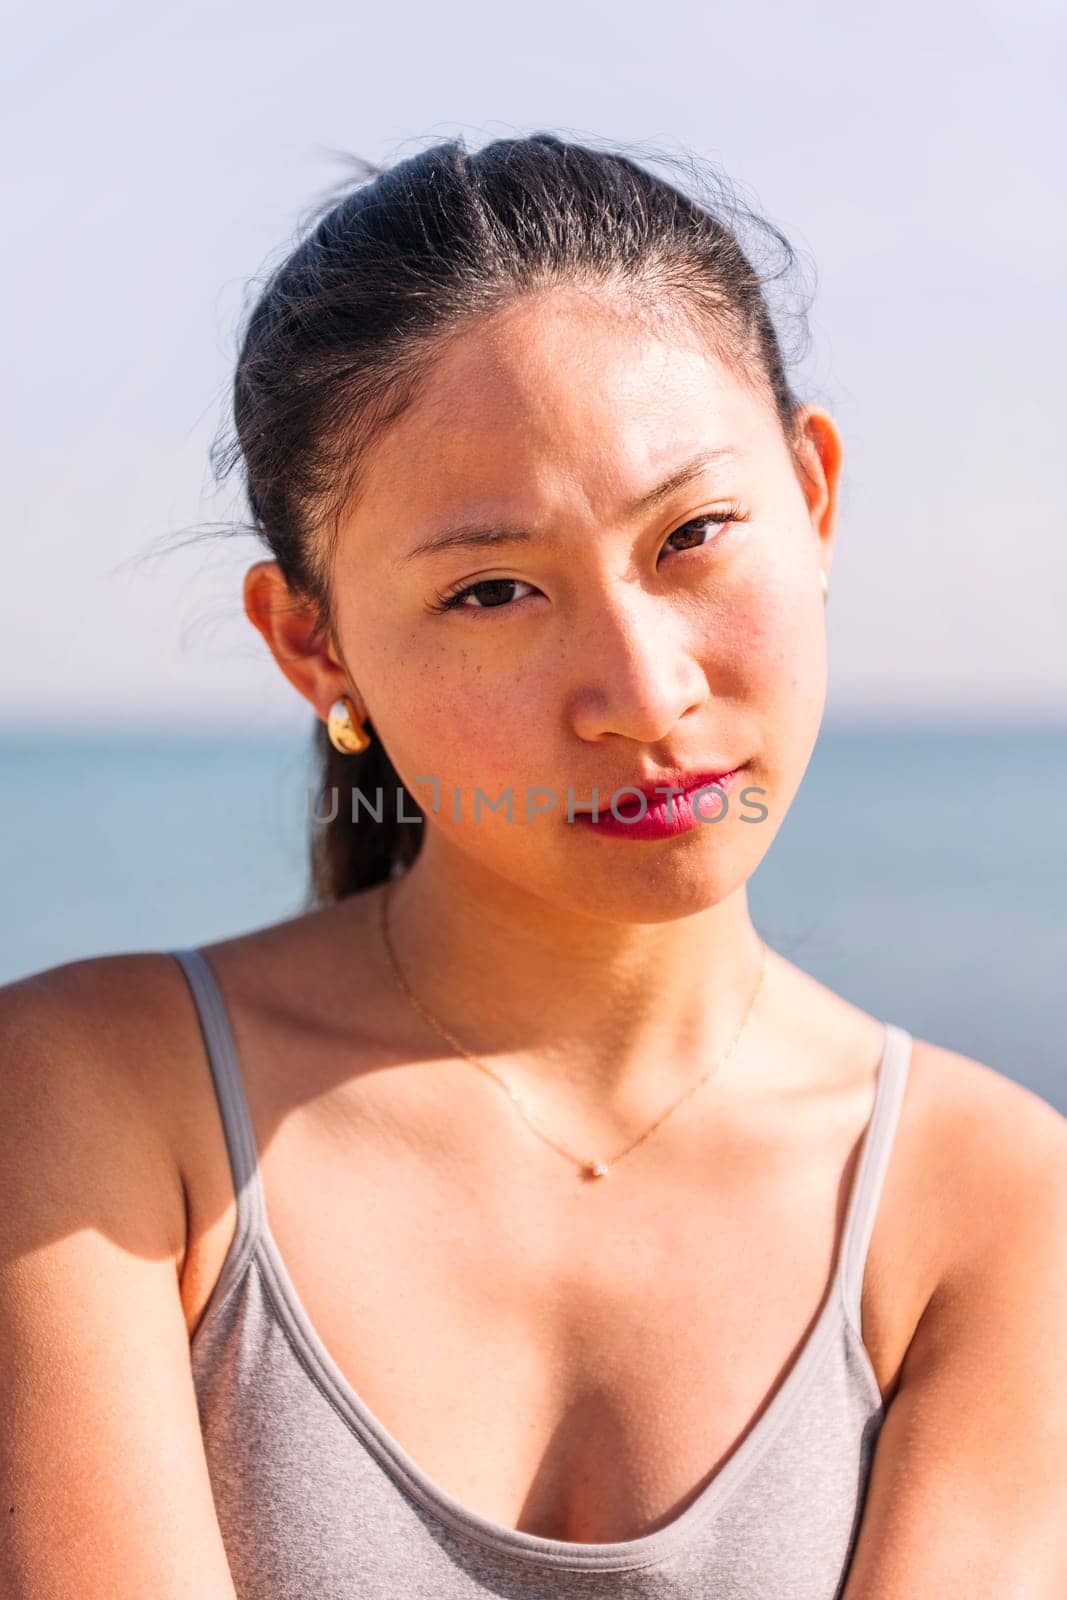 half portrait of a young asian woman smiling happy by raulmelldo